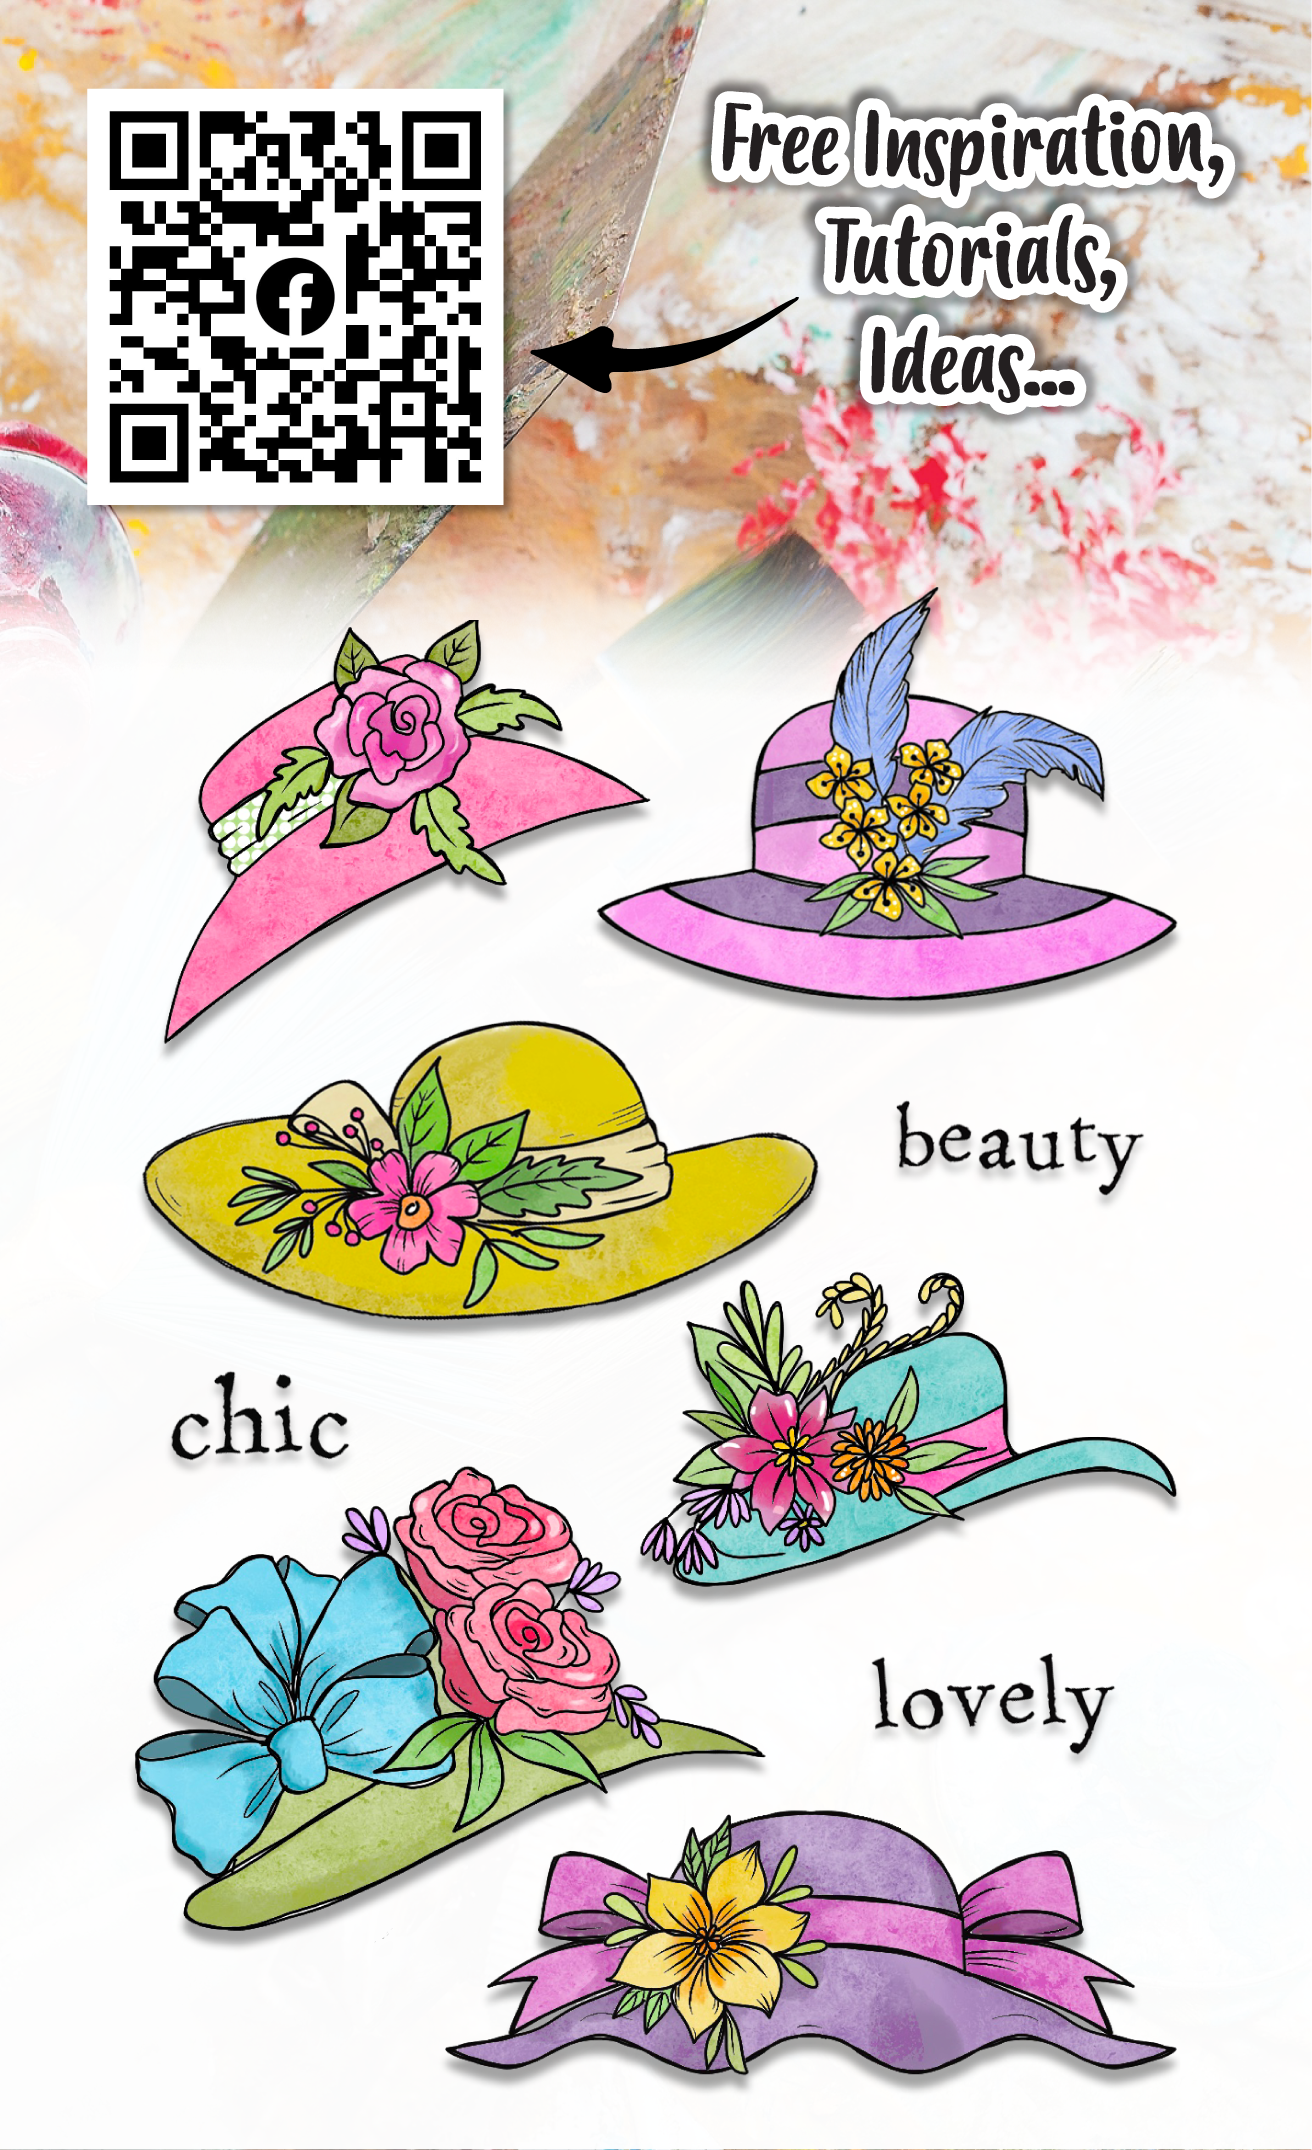 AALL and Create - A6 Stamp Set - Elegant Hats